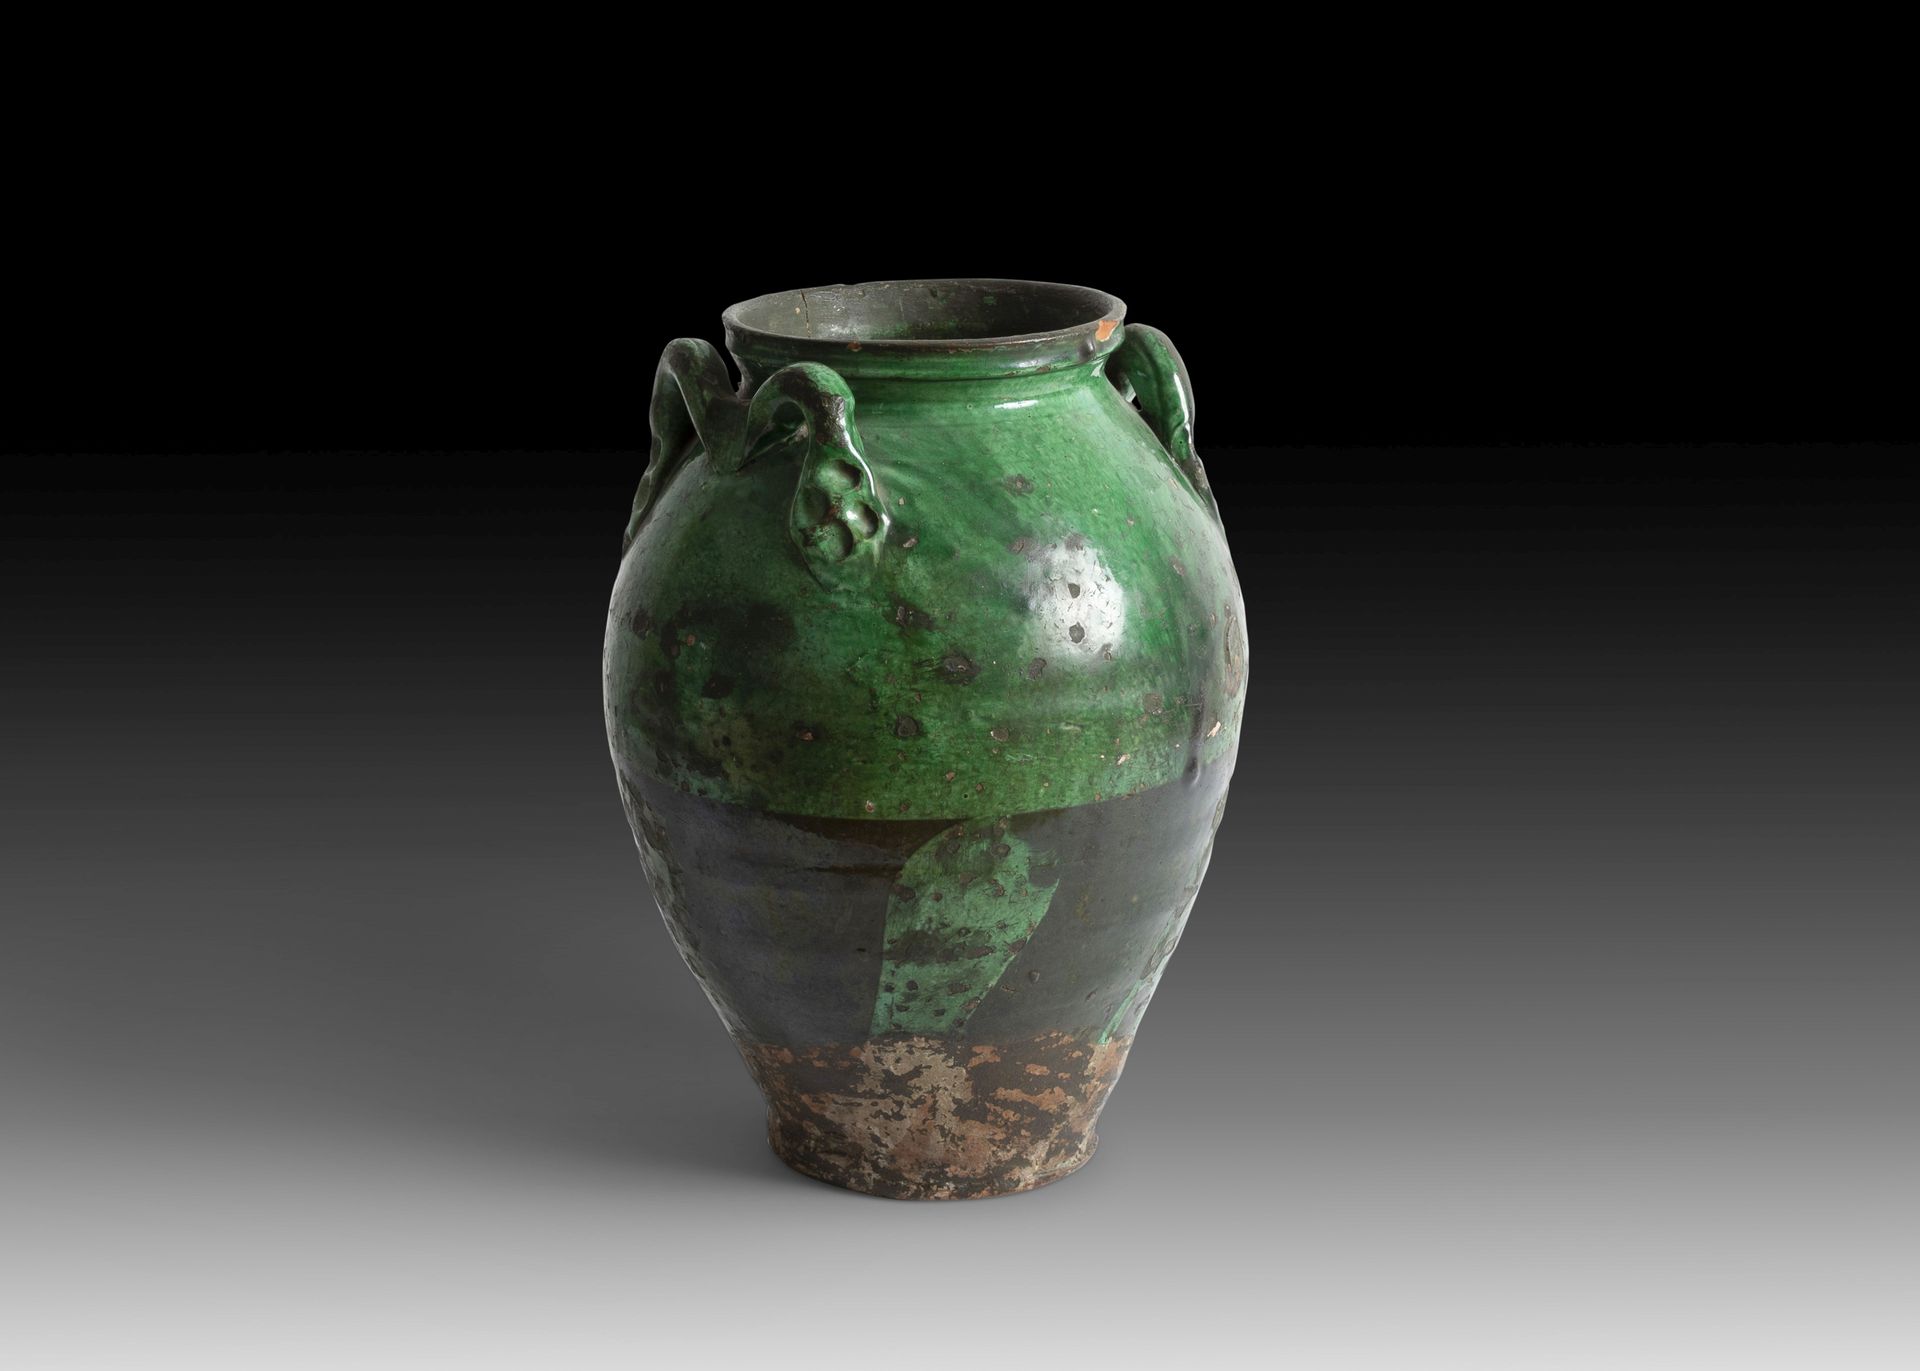 A RARE FATIMID GREEN GLAZED POTTERY VASE WITH HANDLES, EGYPT, 11TH CENTURY 罕见的法蒂&hellip;